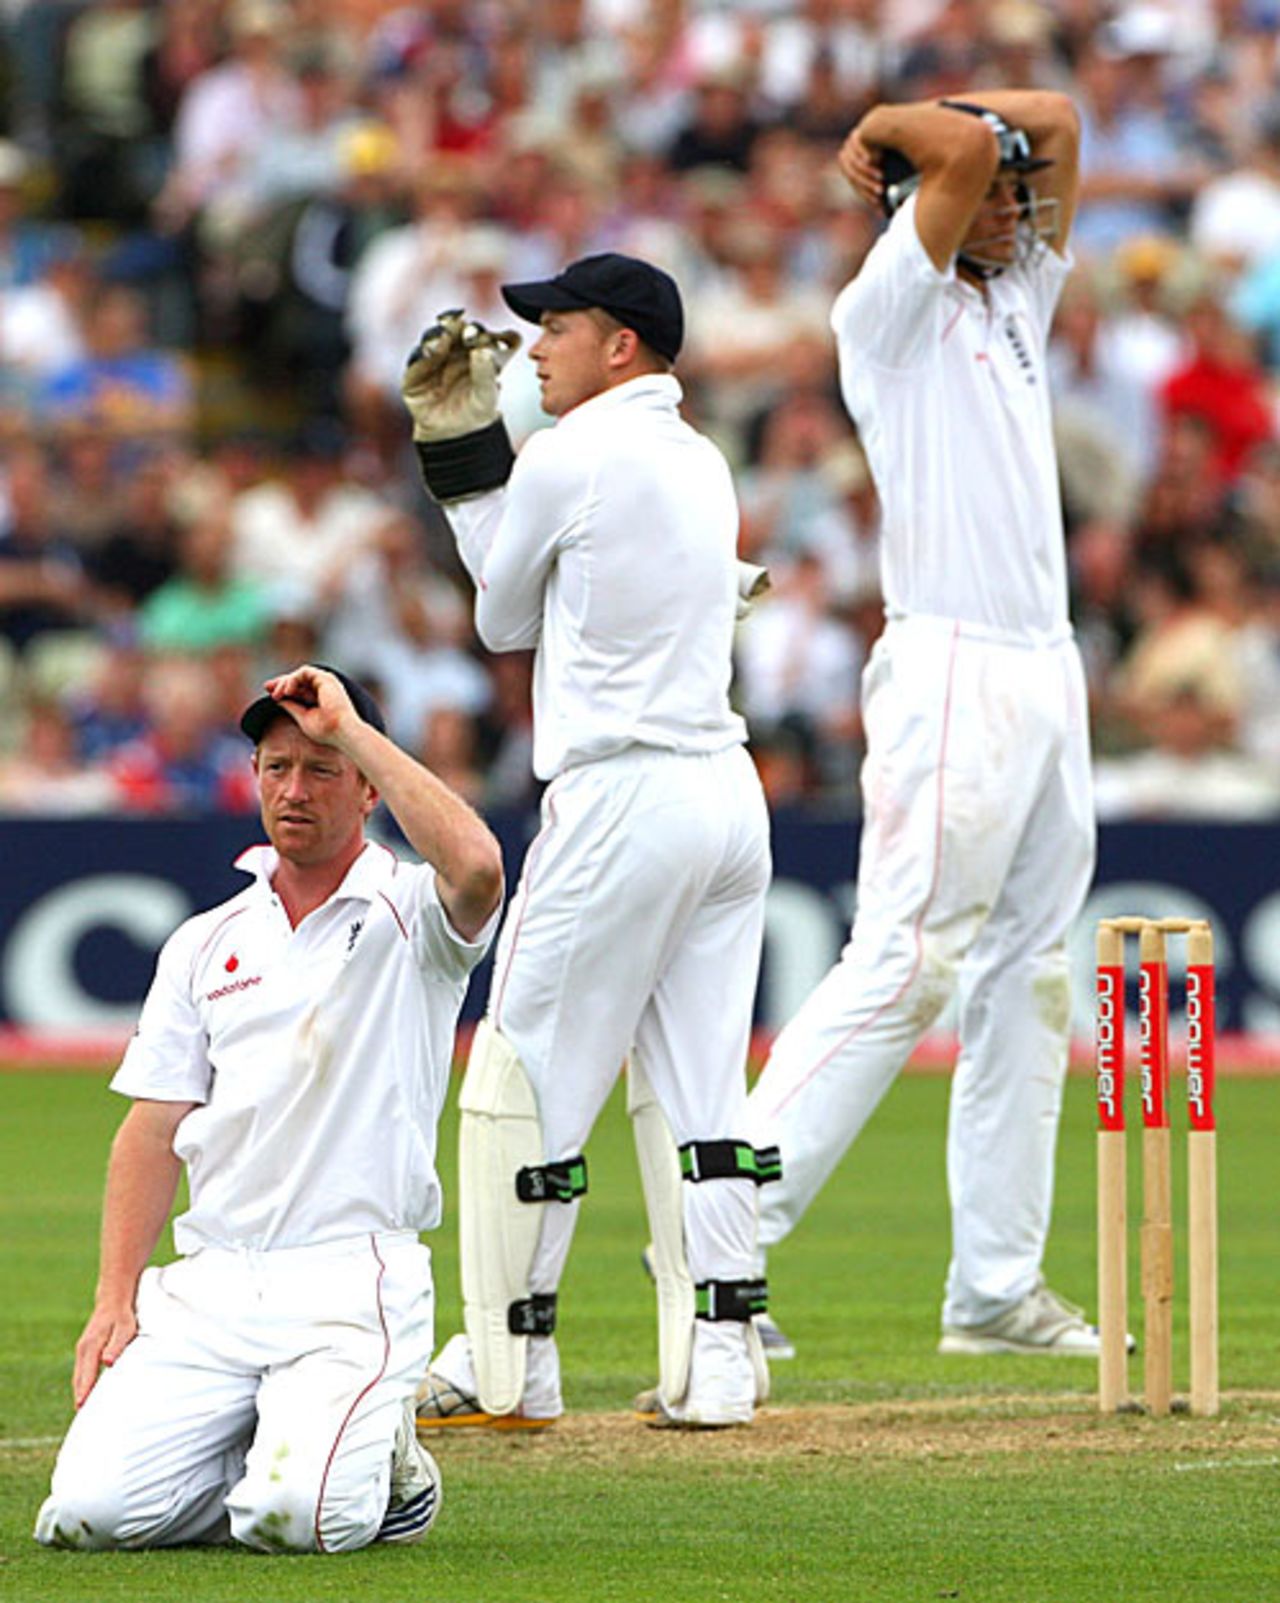 Paul Collingwood, Tim Ambrose and Alastair Cook are exasperated as another chance goes begging against South Africa, England v South Africa, 3rd Test, Edgbaston, August 2, 2008